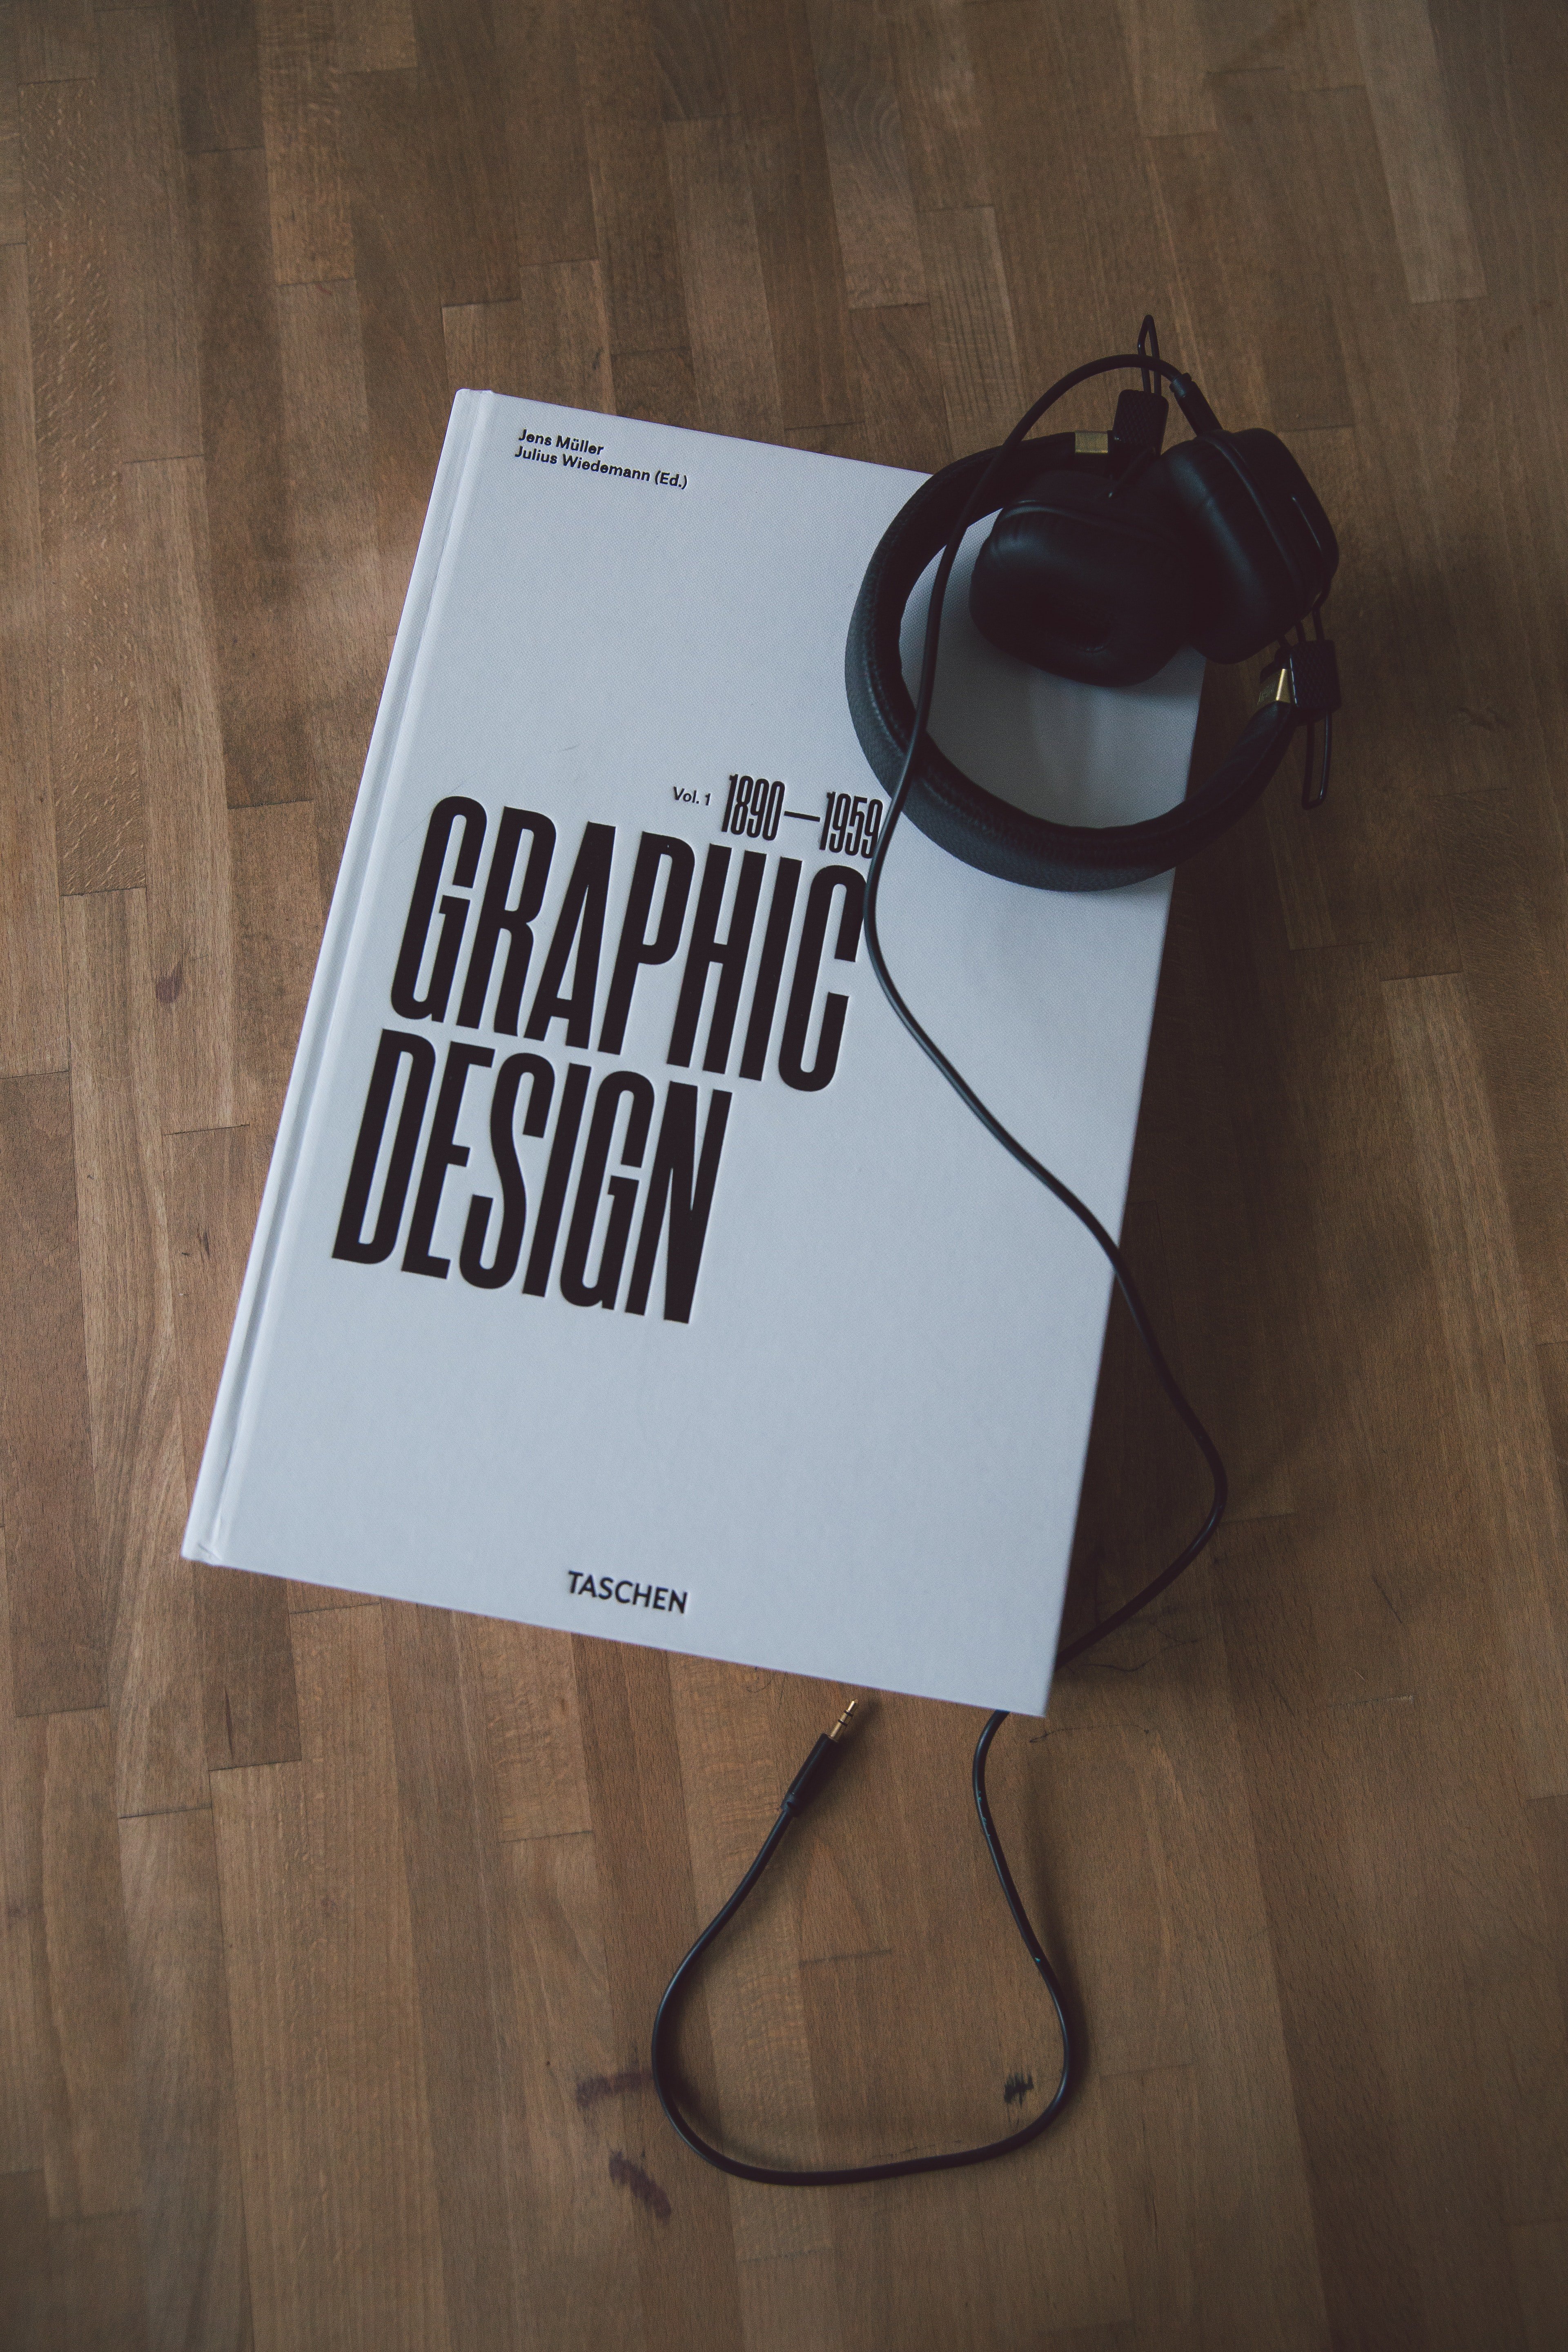 A journal with graphic design written on it with headphones on top